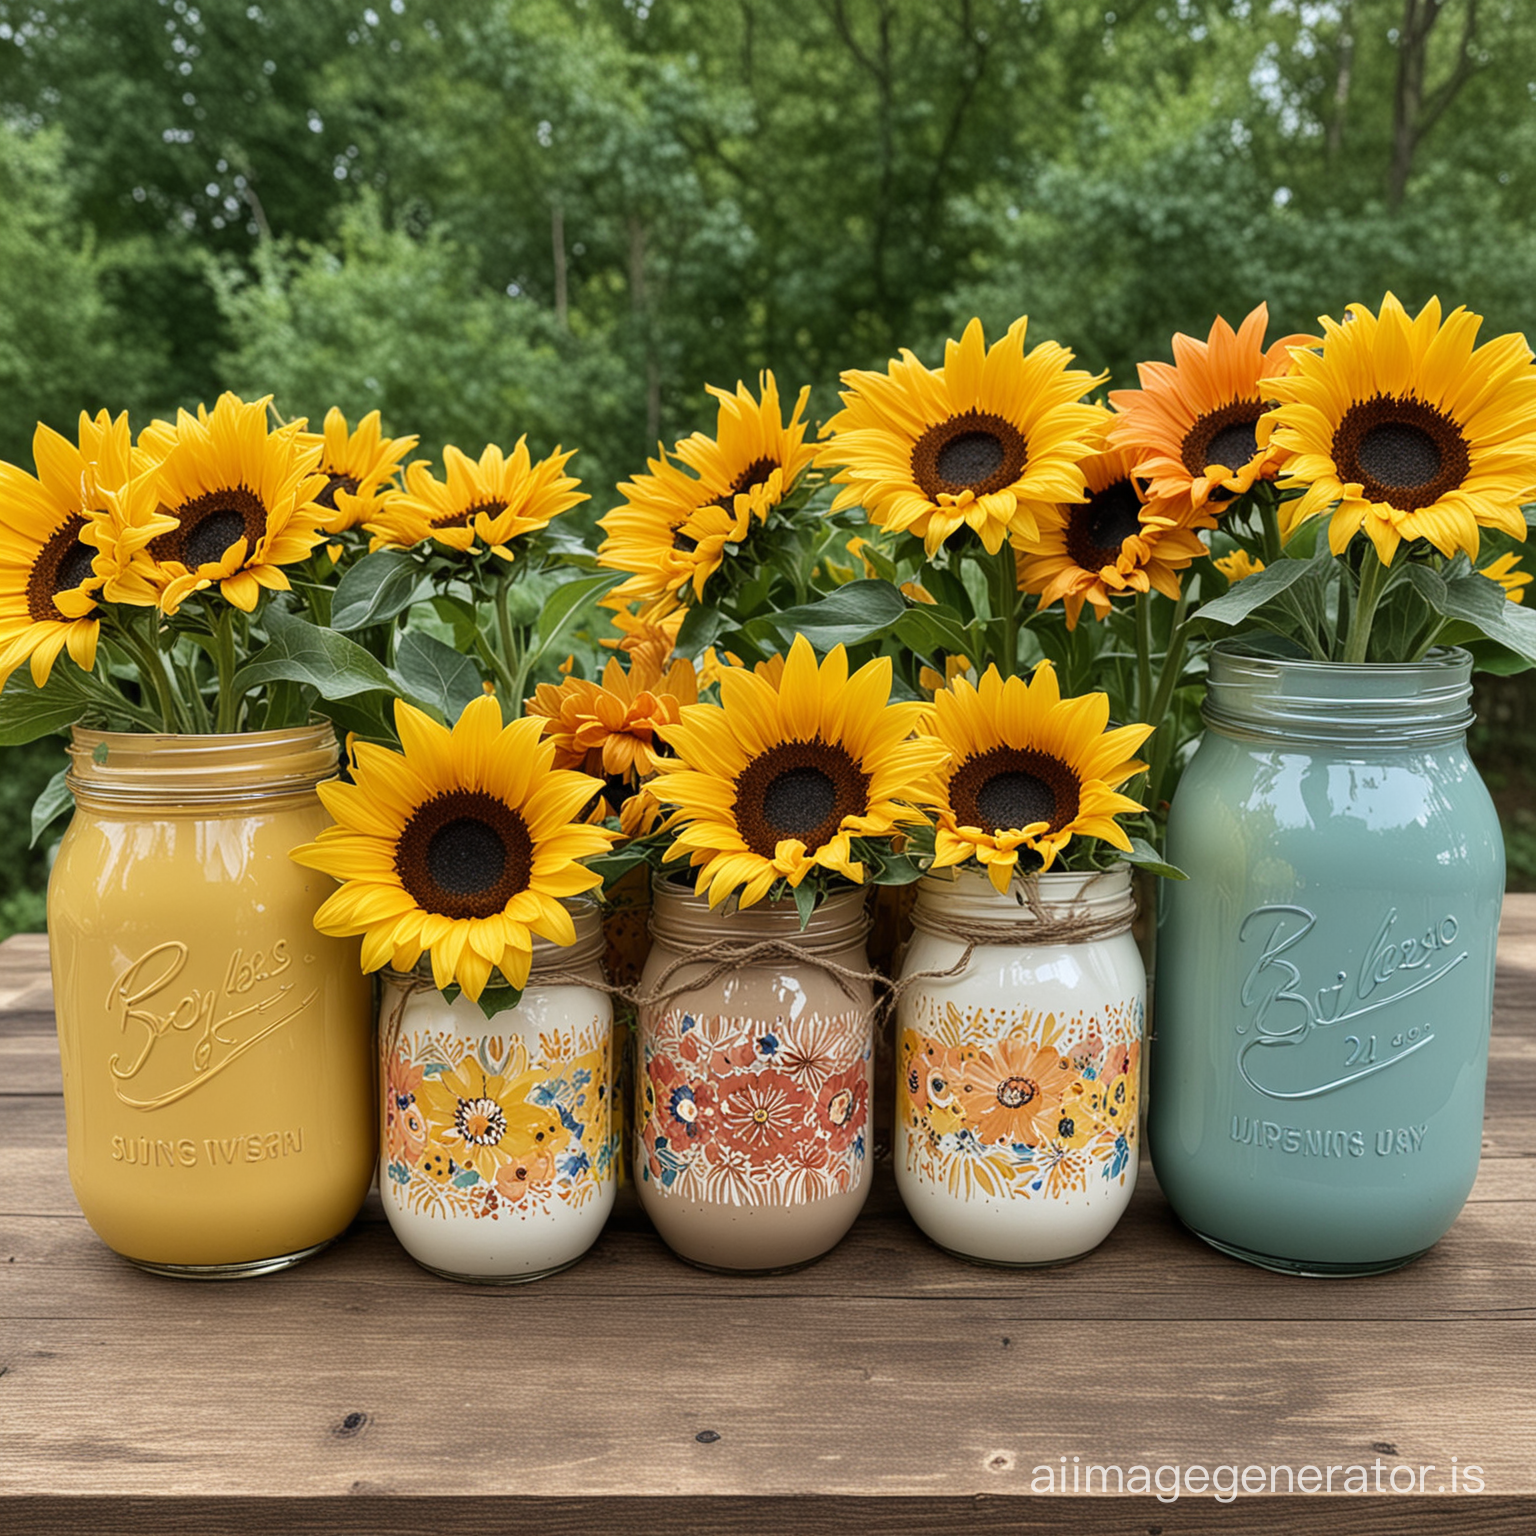 jars painted in boho chic colors filled with sunflowers